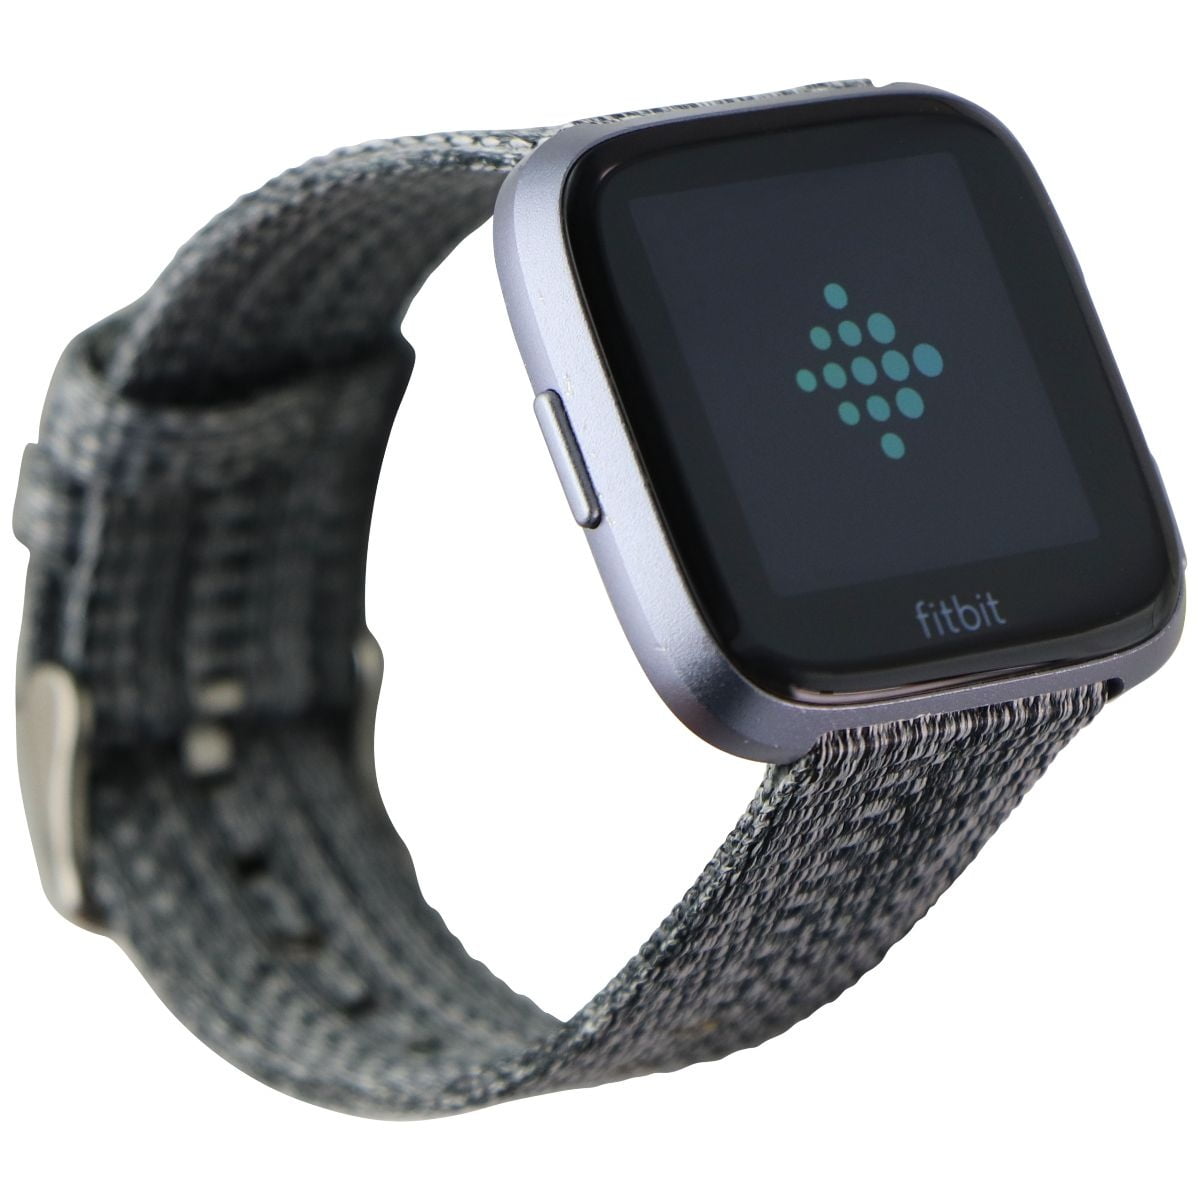 Fitbit Versa Special Edition Smart Watch Charcoal / Woven (FB505) (Used) | Walmart Canada